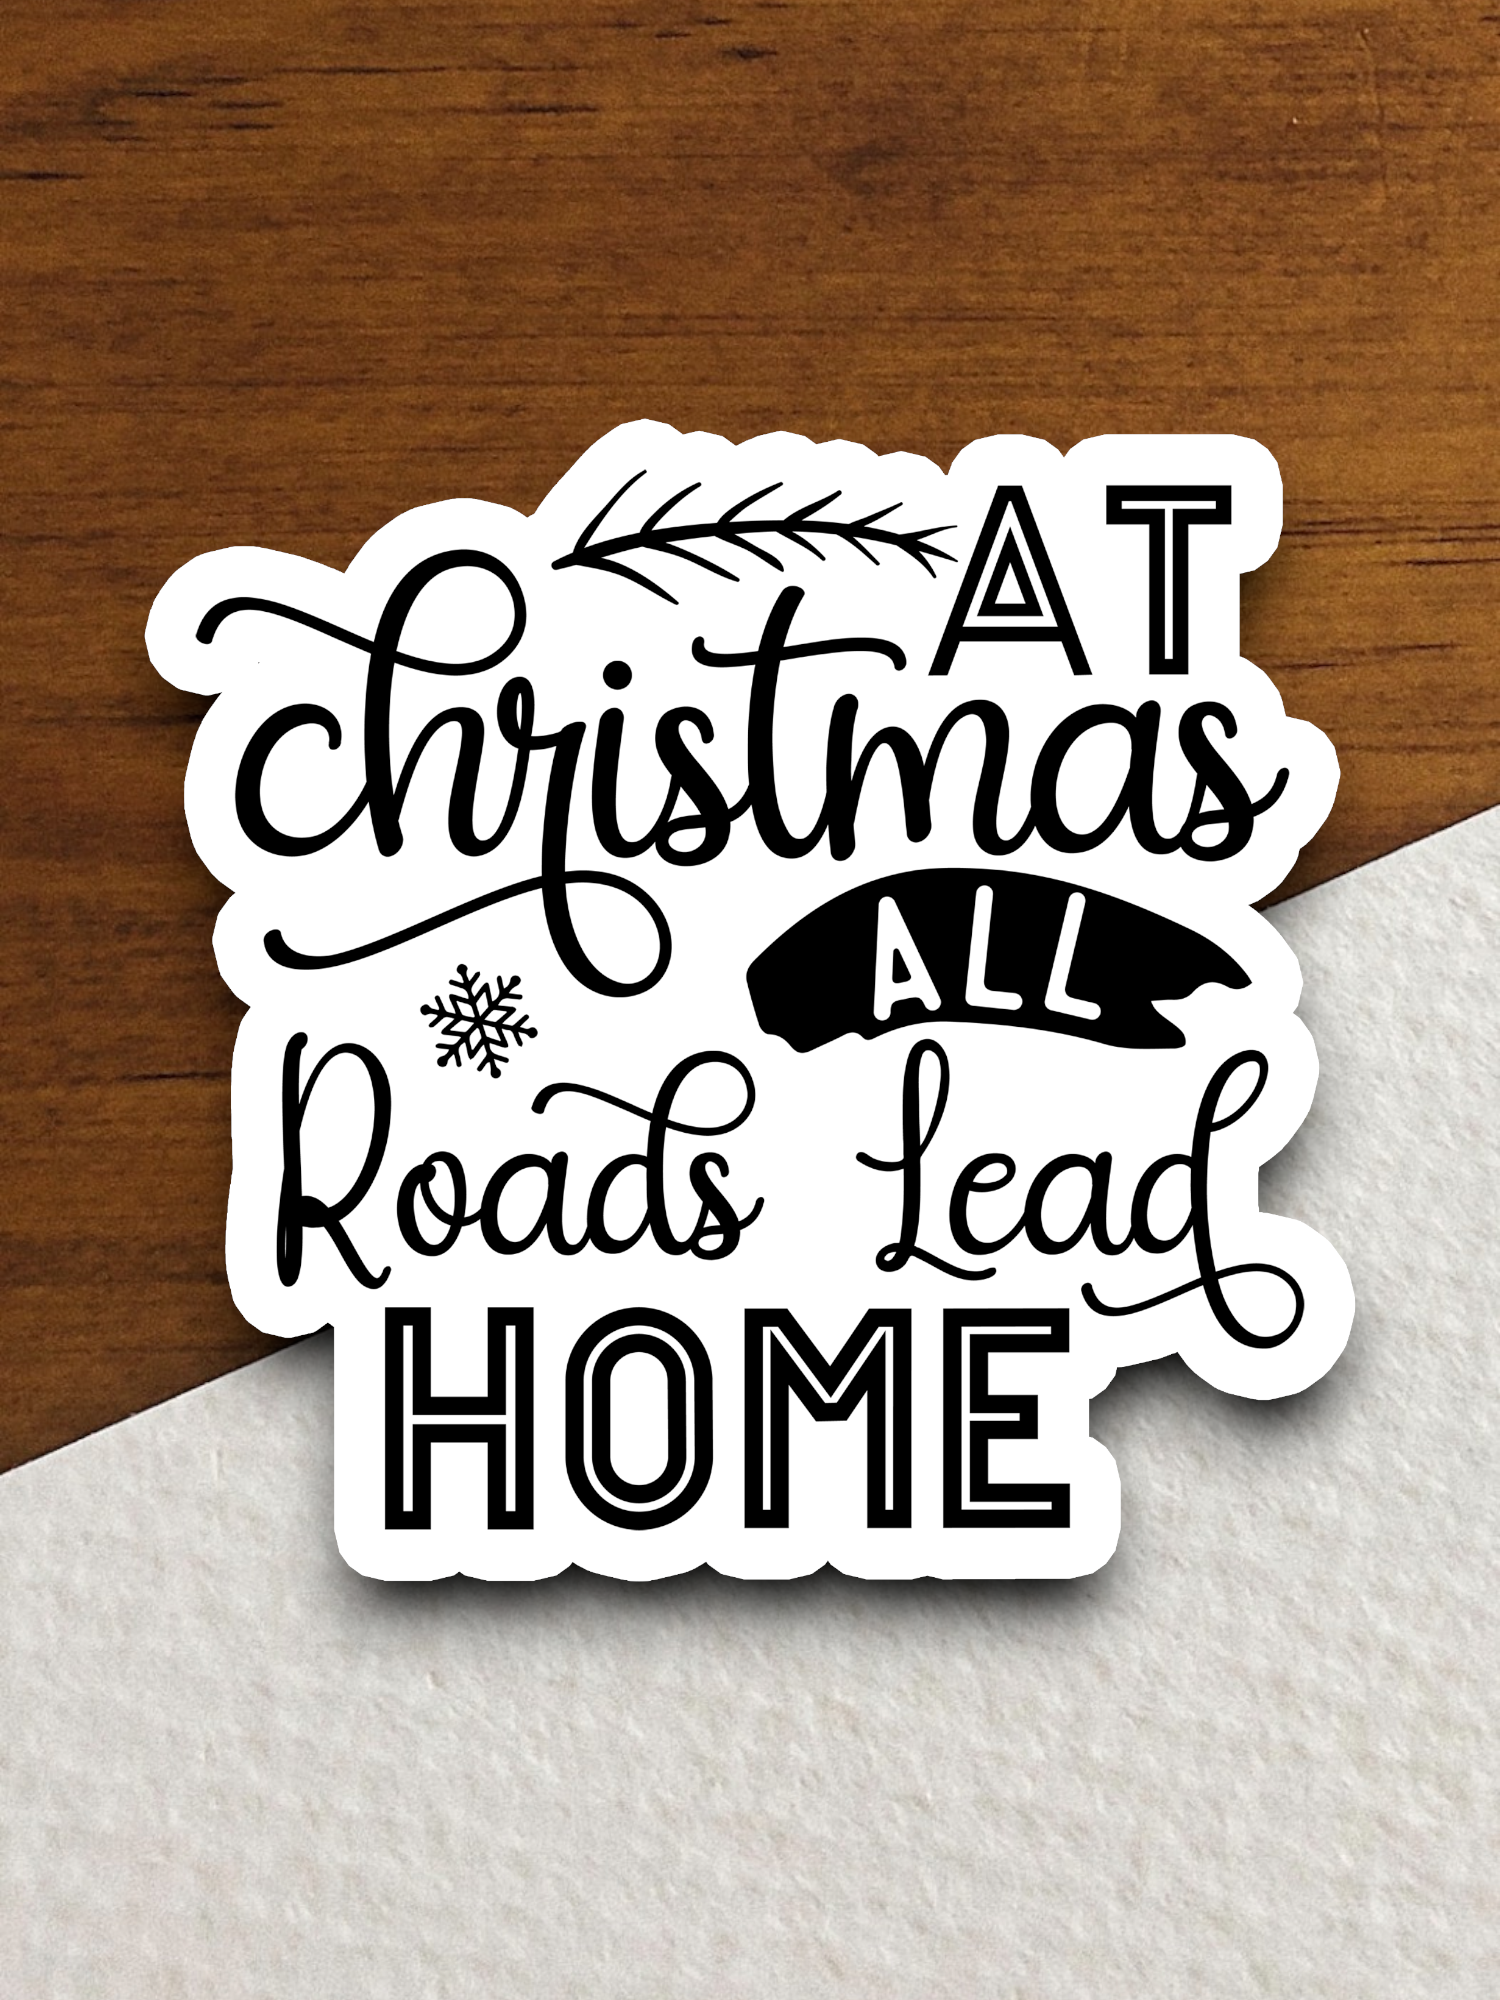 At Christmas All Roads Lead Home  1 - Holiday Sticker